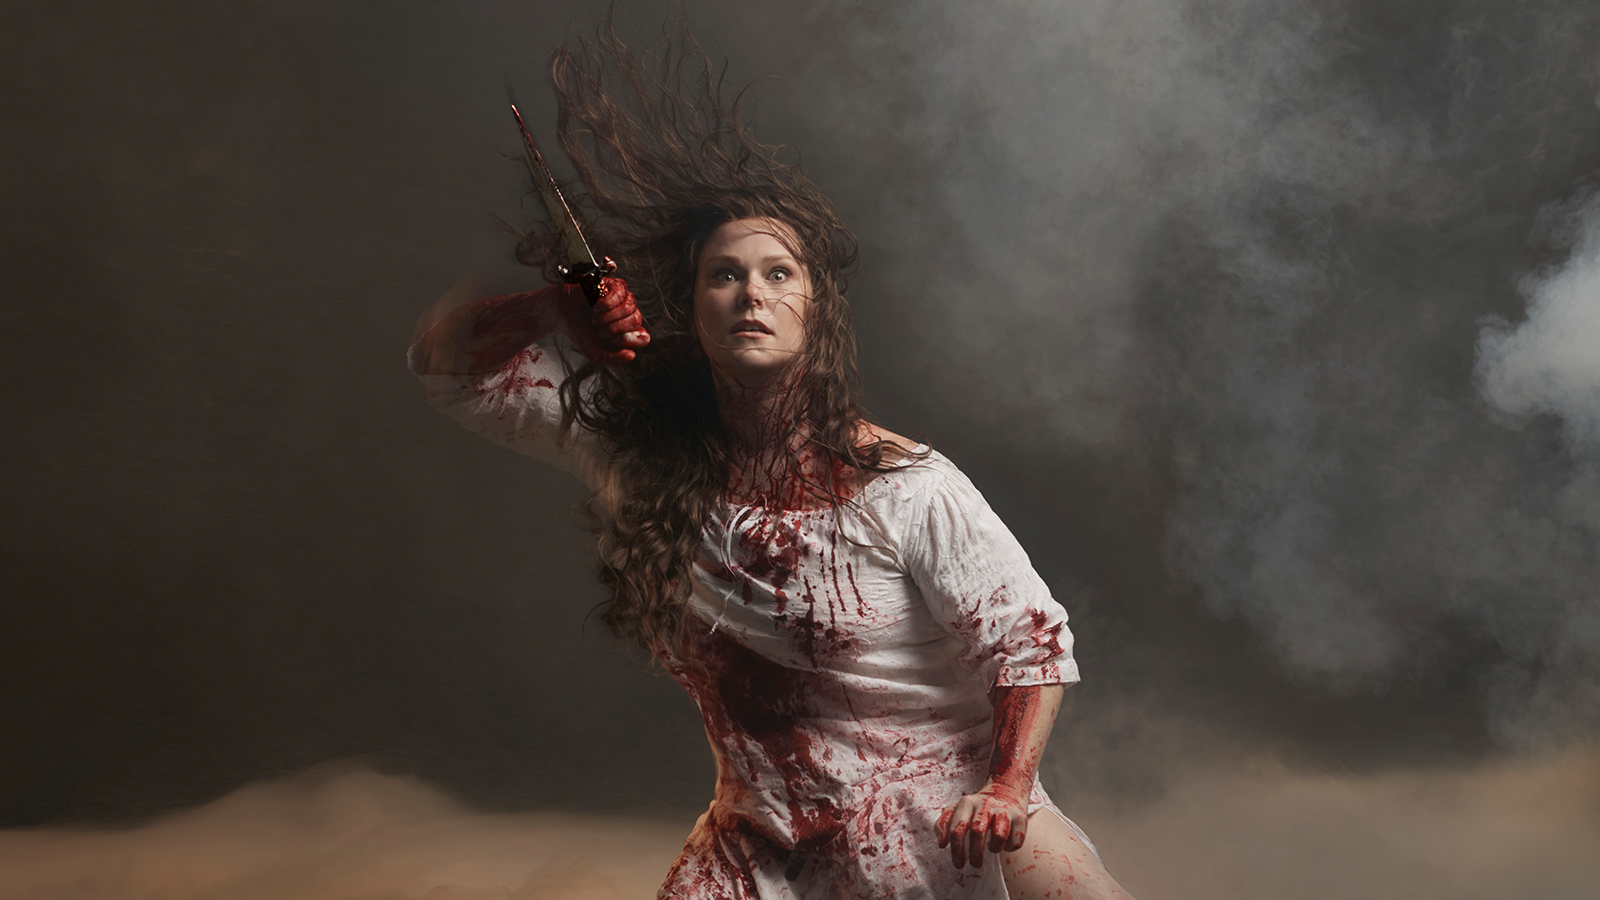 A woman holding a dagger and drenched with blood.